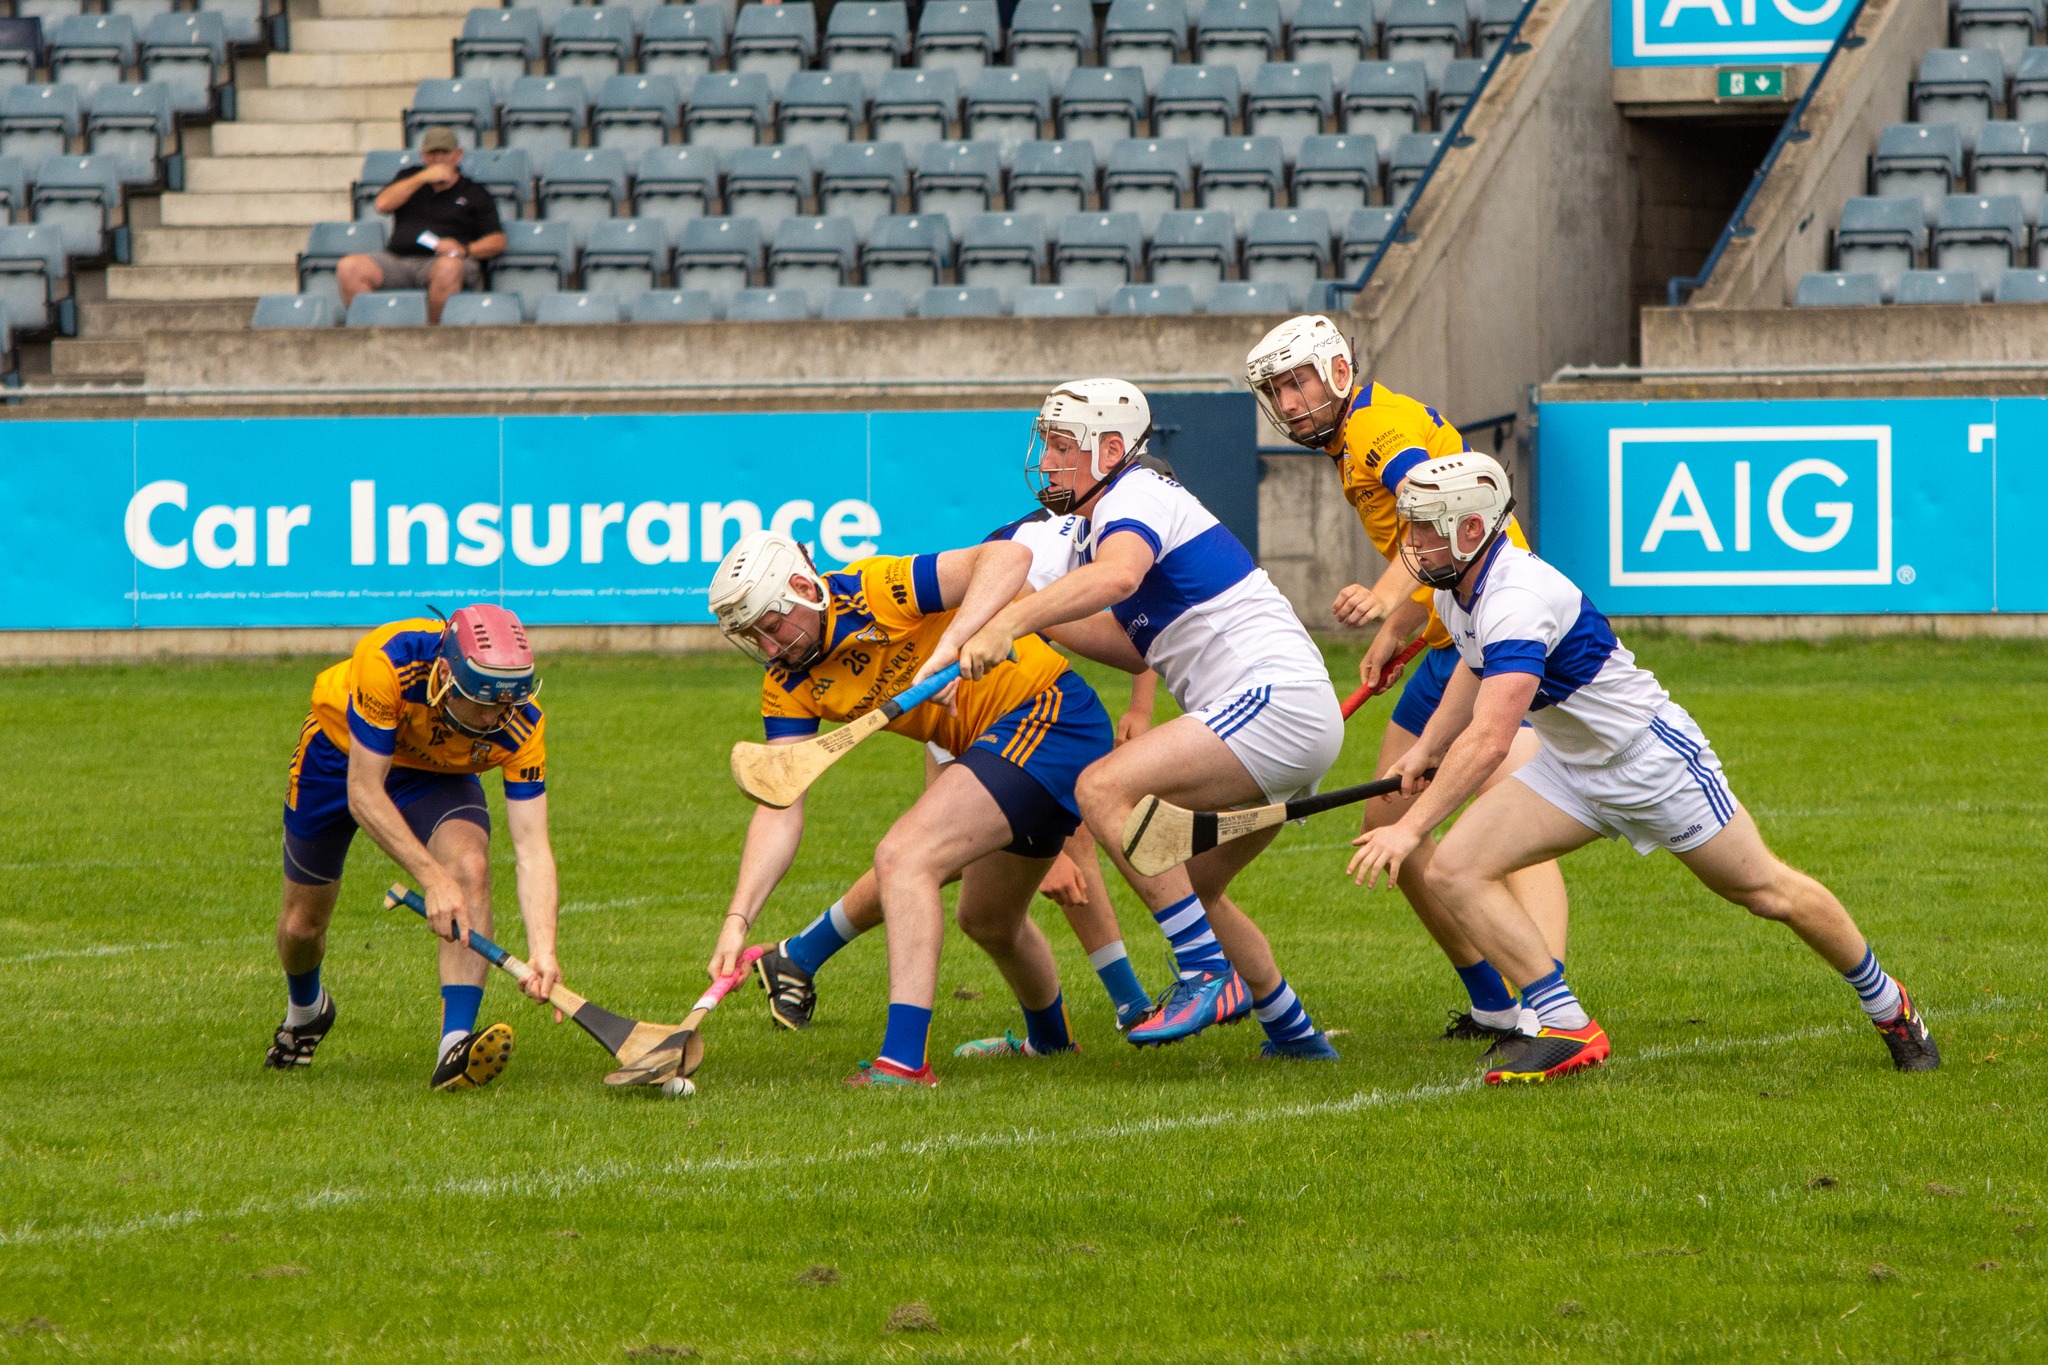 Two teams of hurling contesting a ball